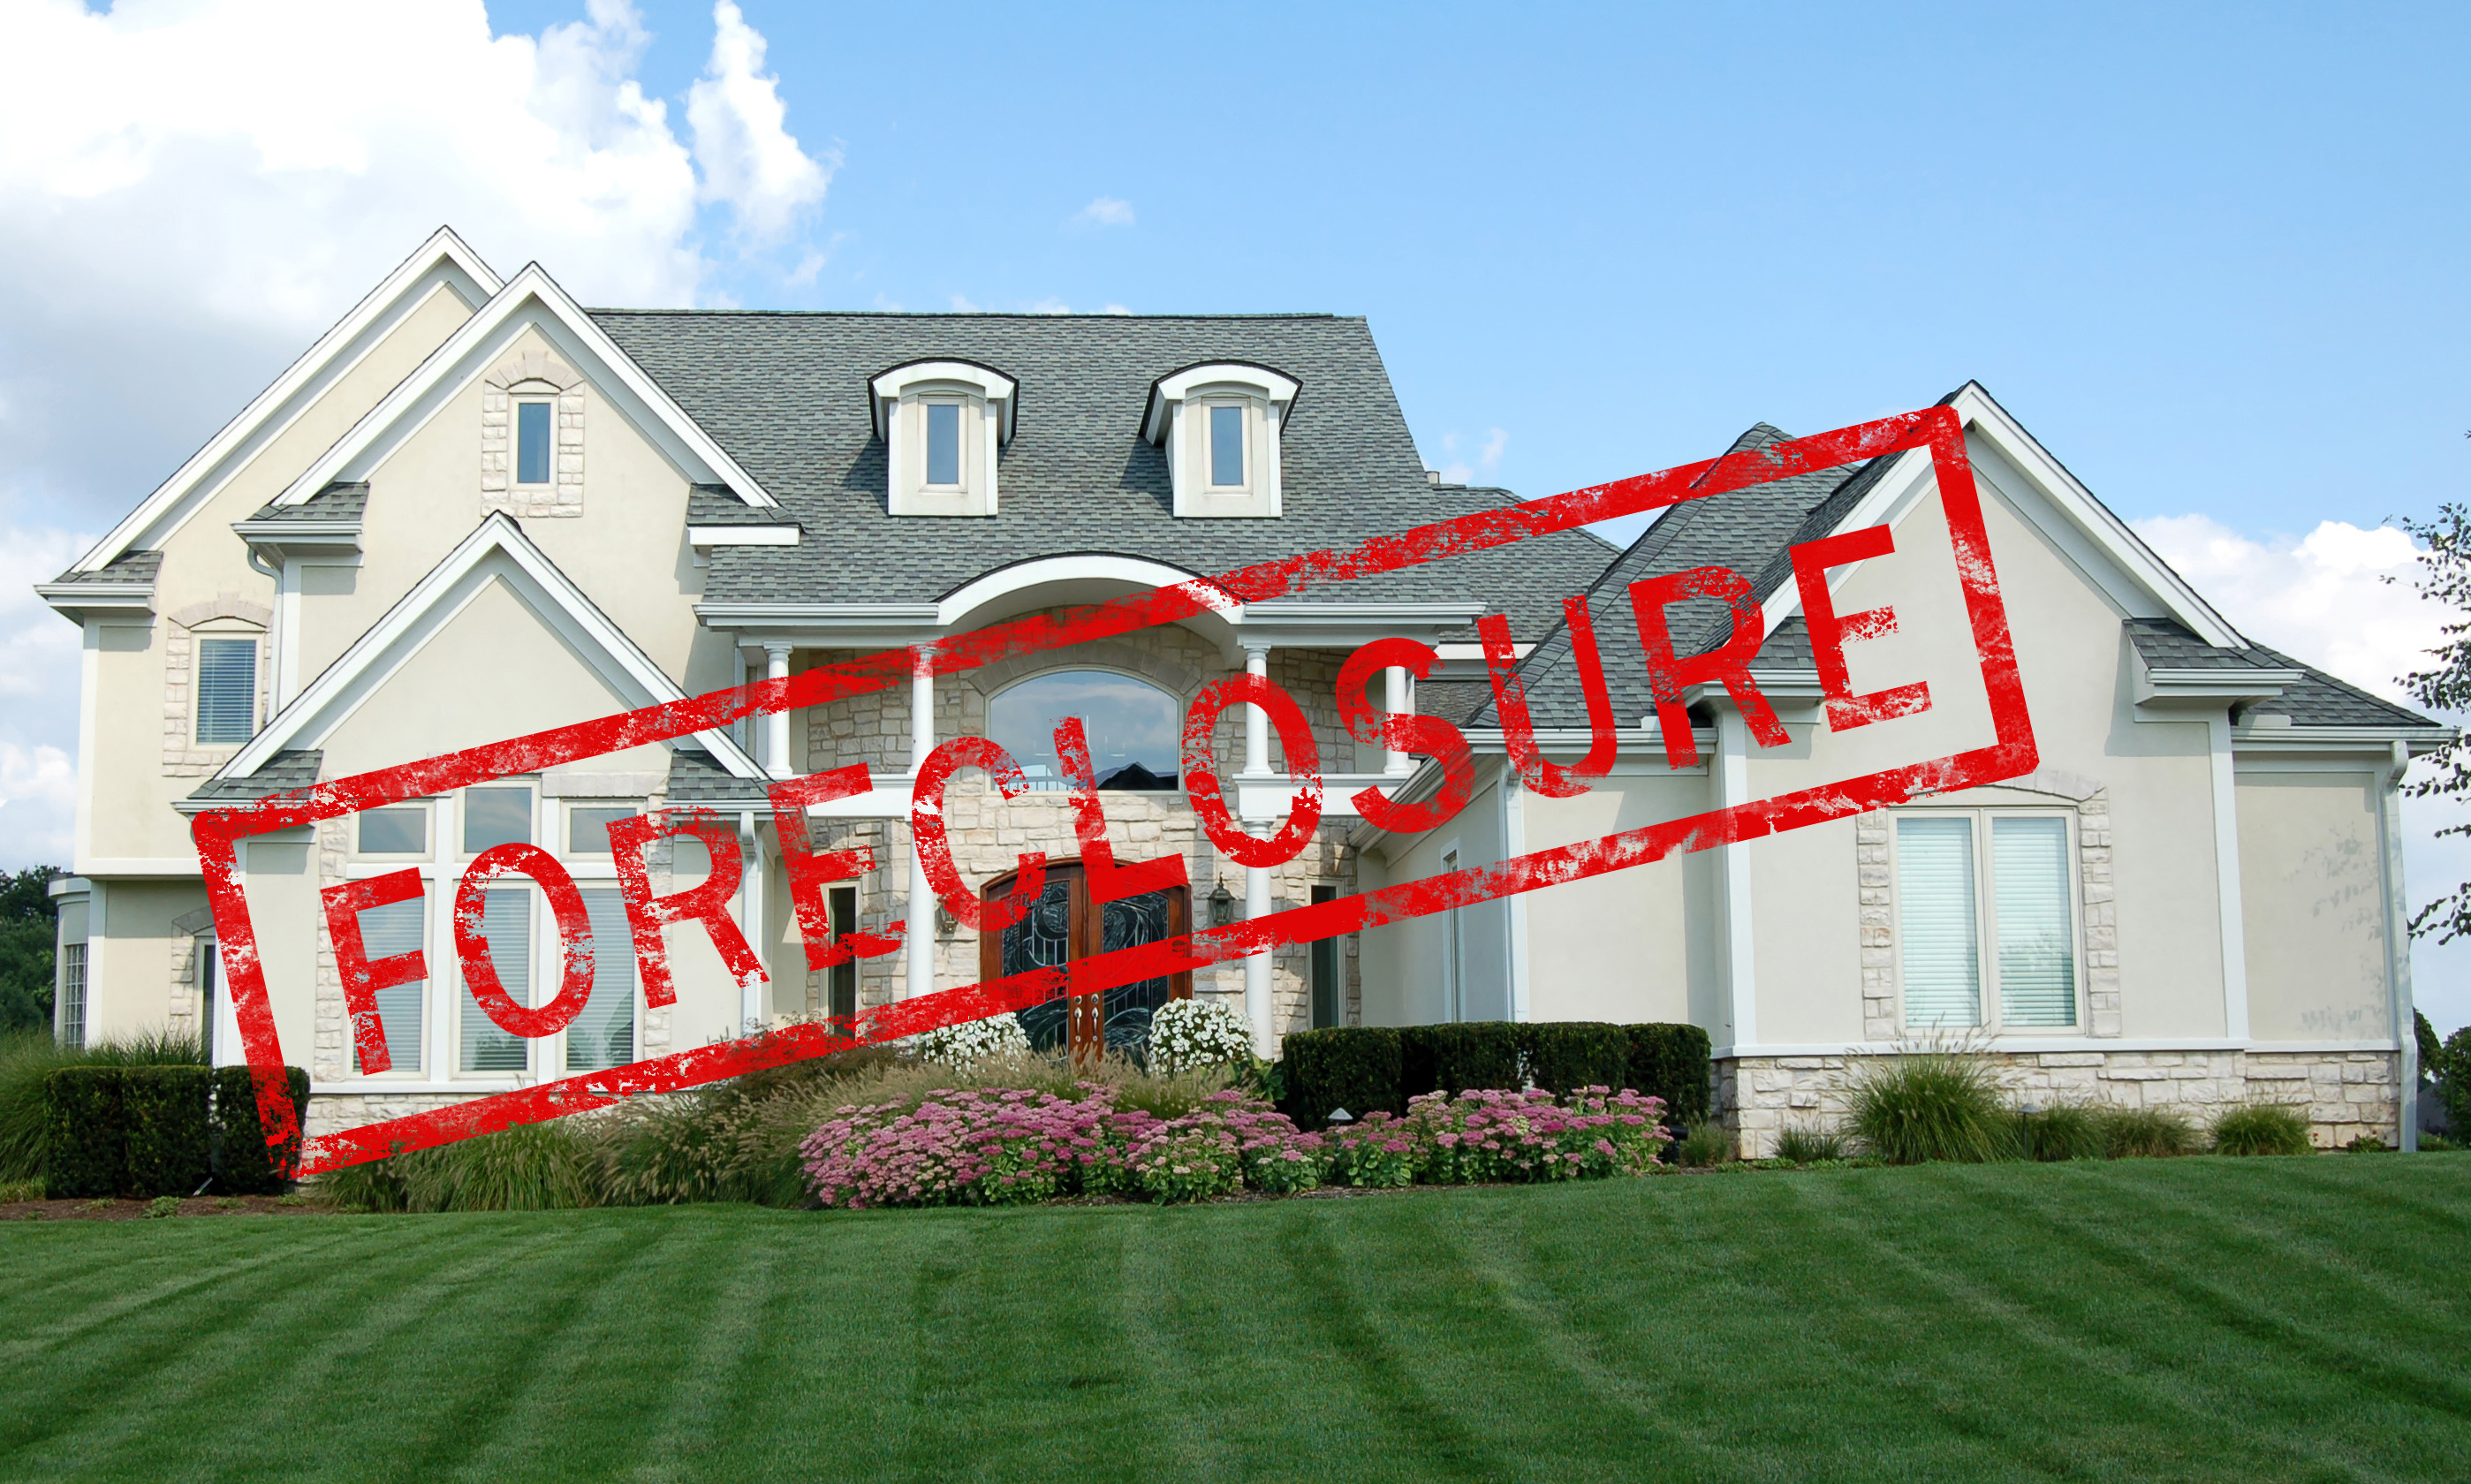 Call Hub City Appraisals  when you need appraisals pertaining to Lubbock foreclosures